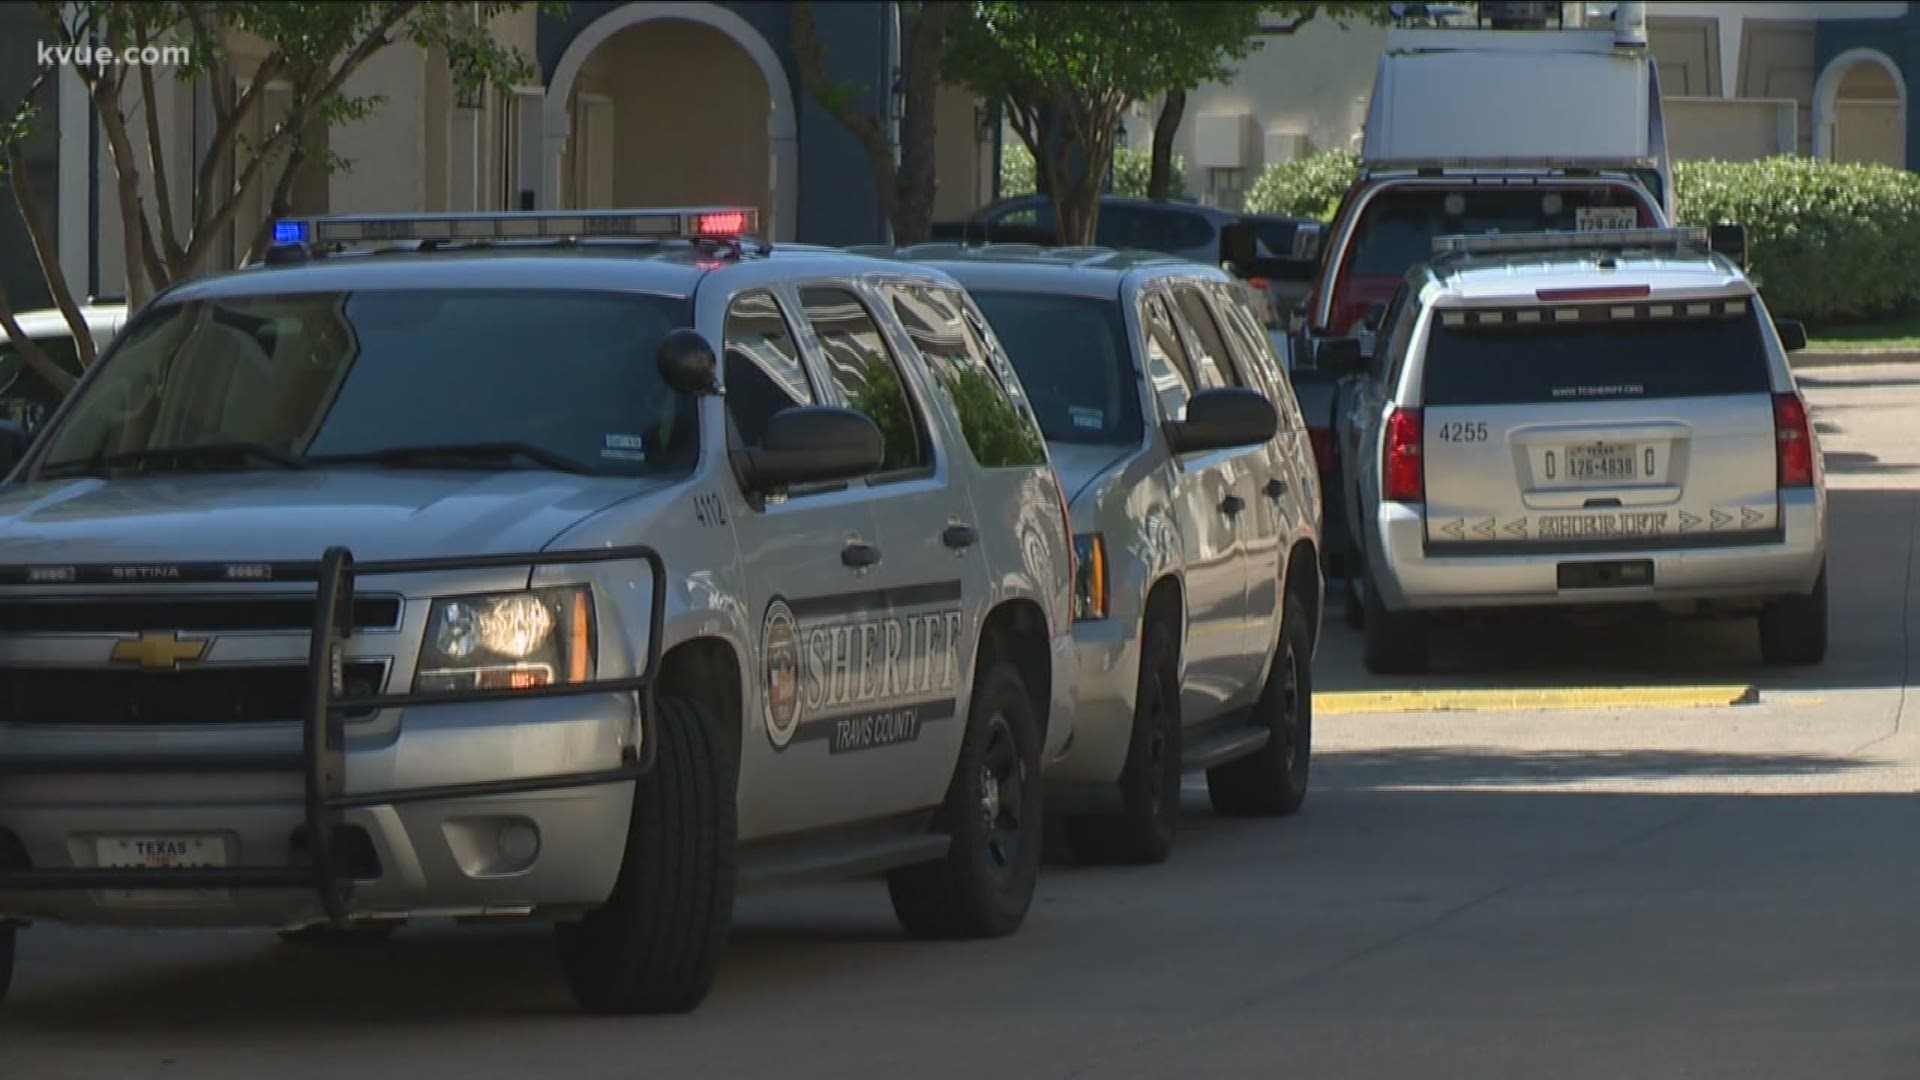 We now know the name of the man accused in a shooting in Steiner Ranch over the weekend.